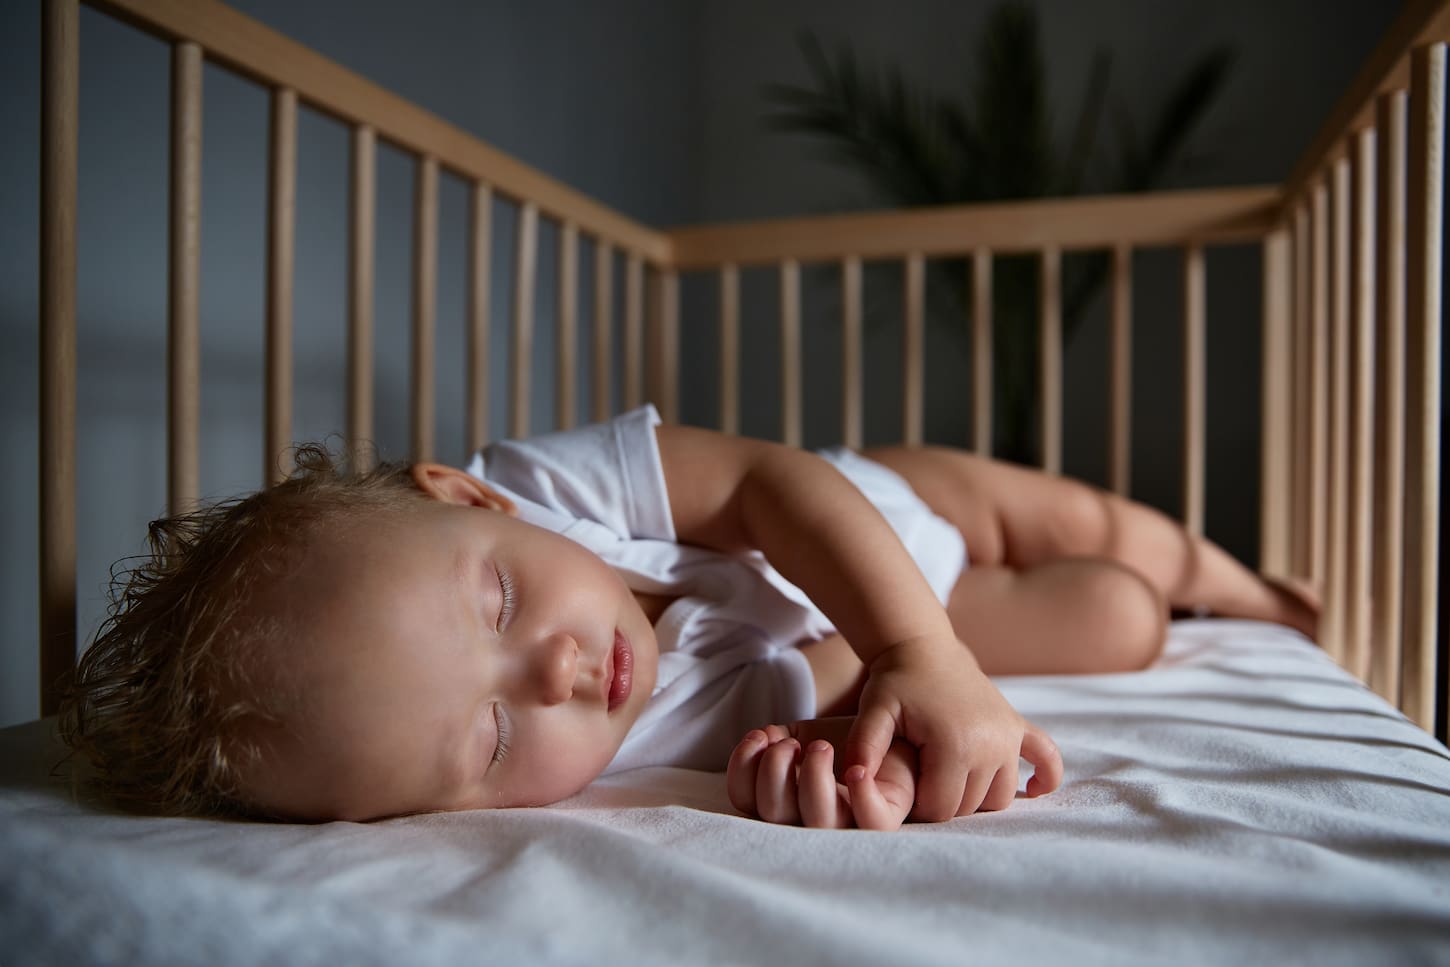 An image of a cute baby sleeping at night in a cradle.